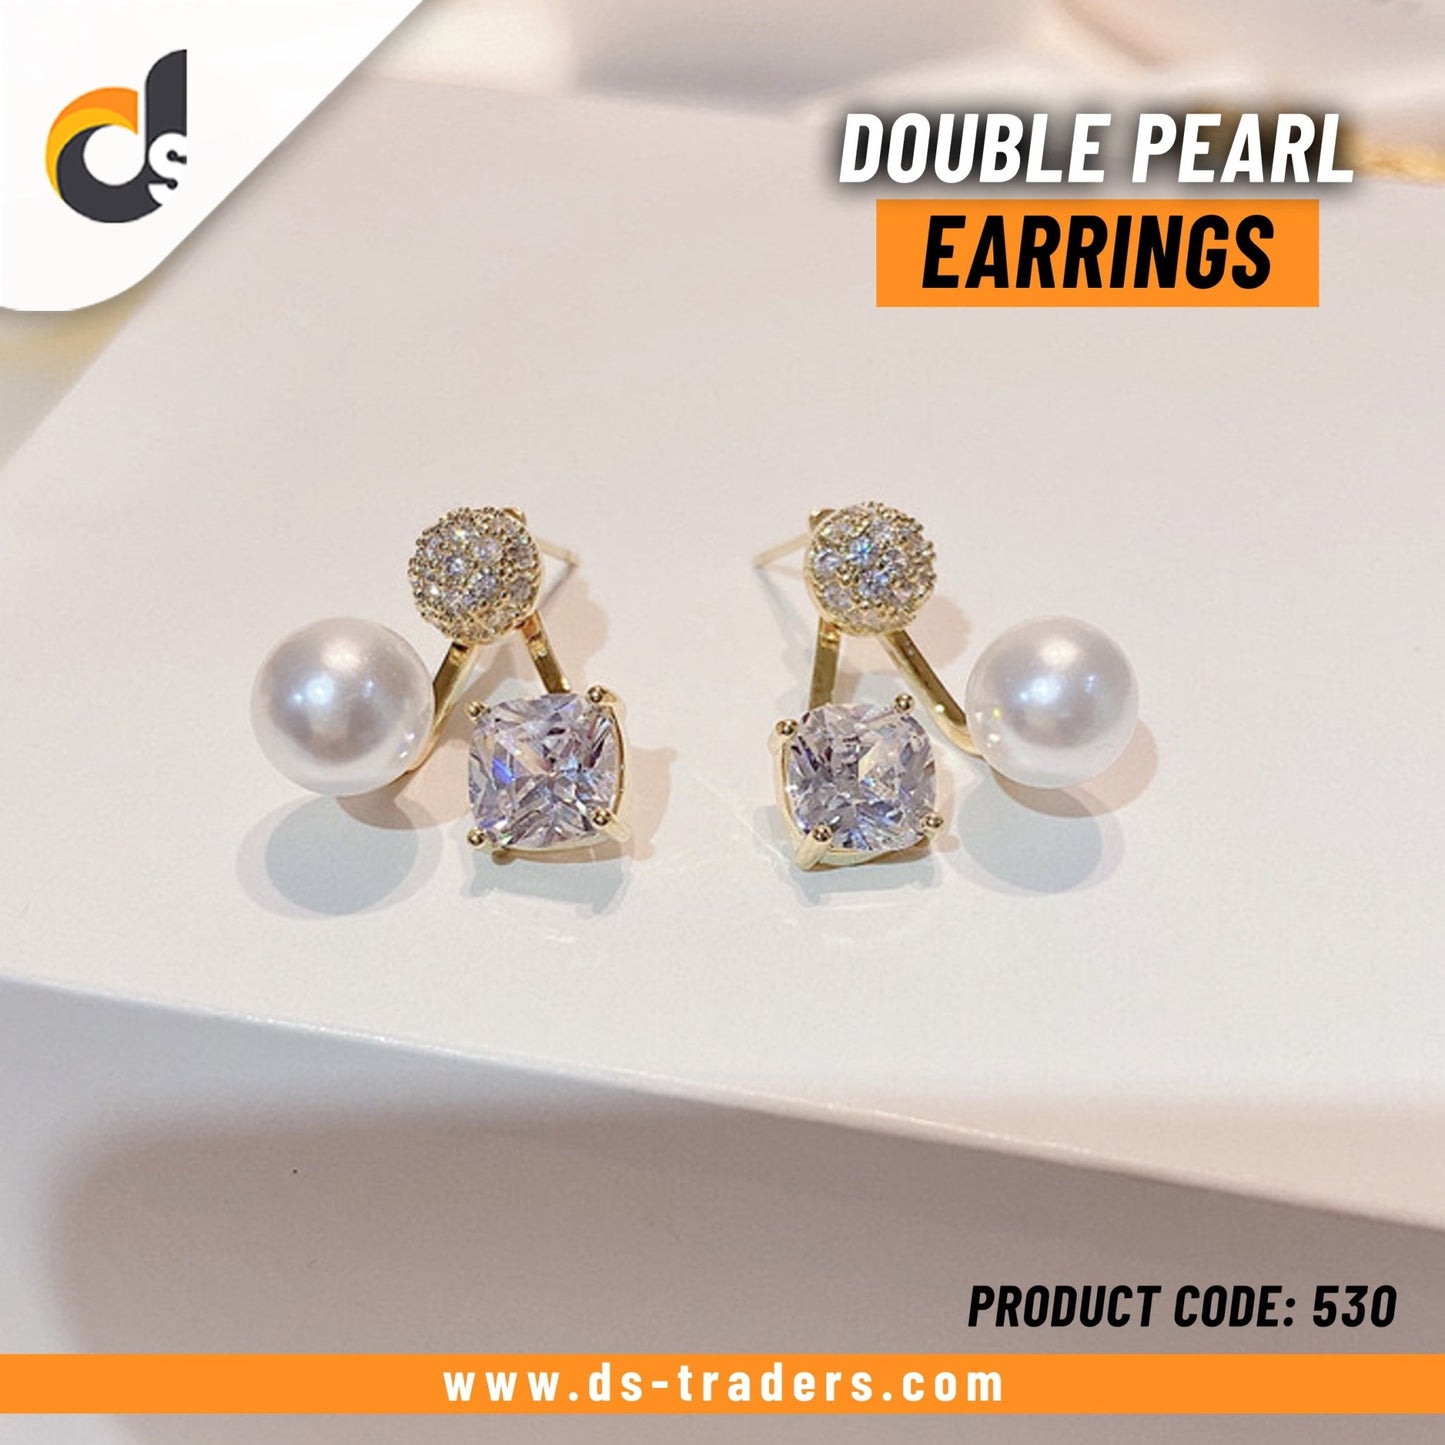 Double Pearl Earrings - DS Traders